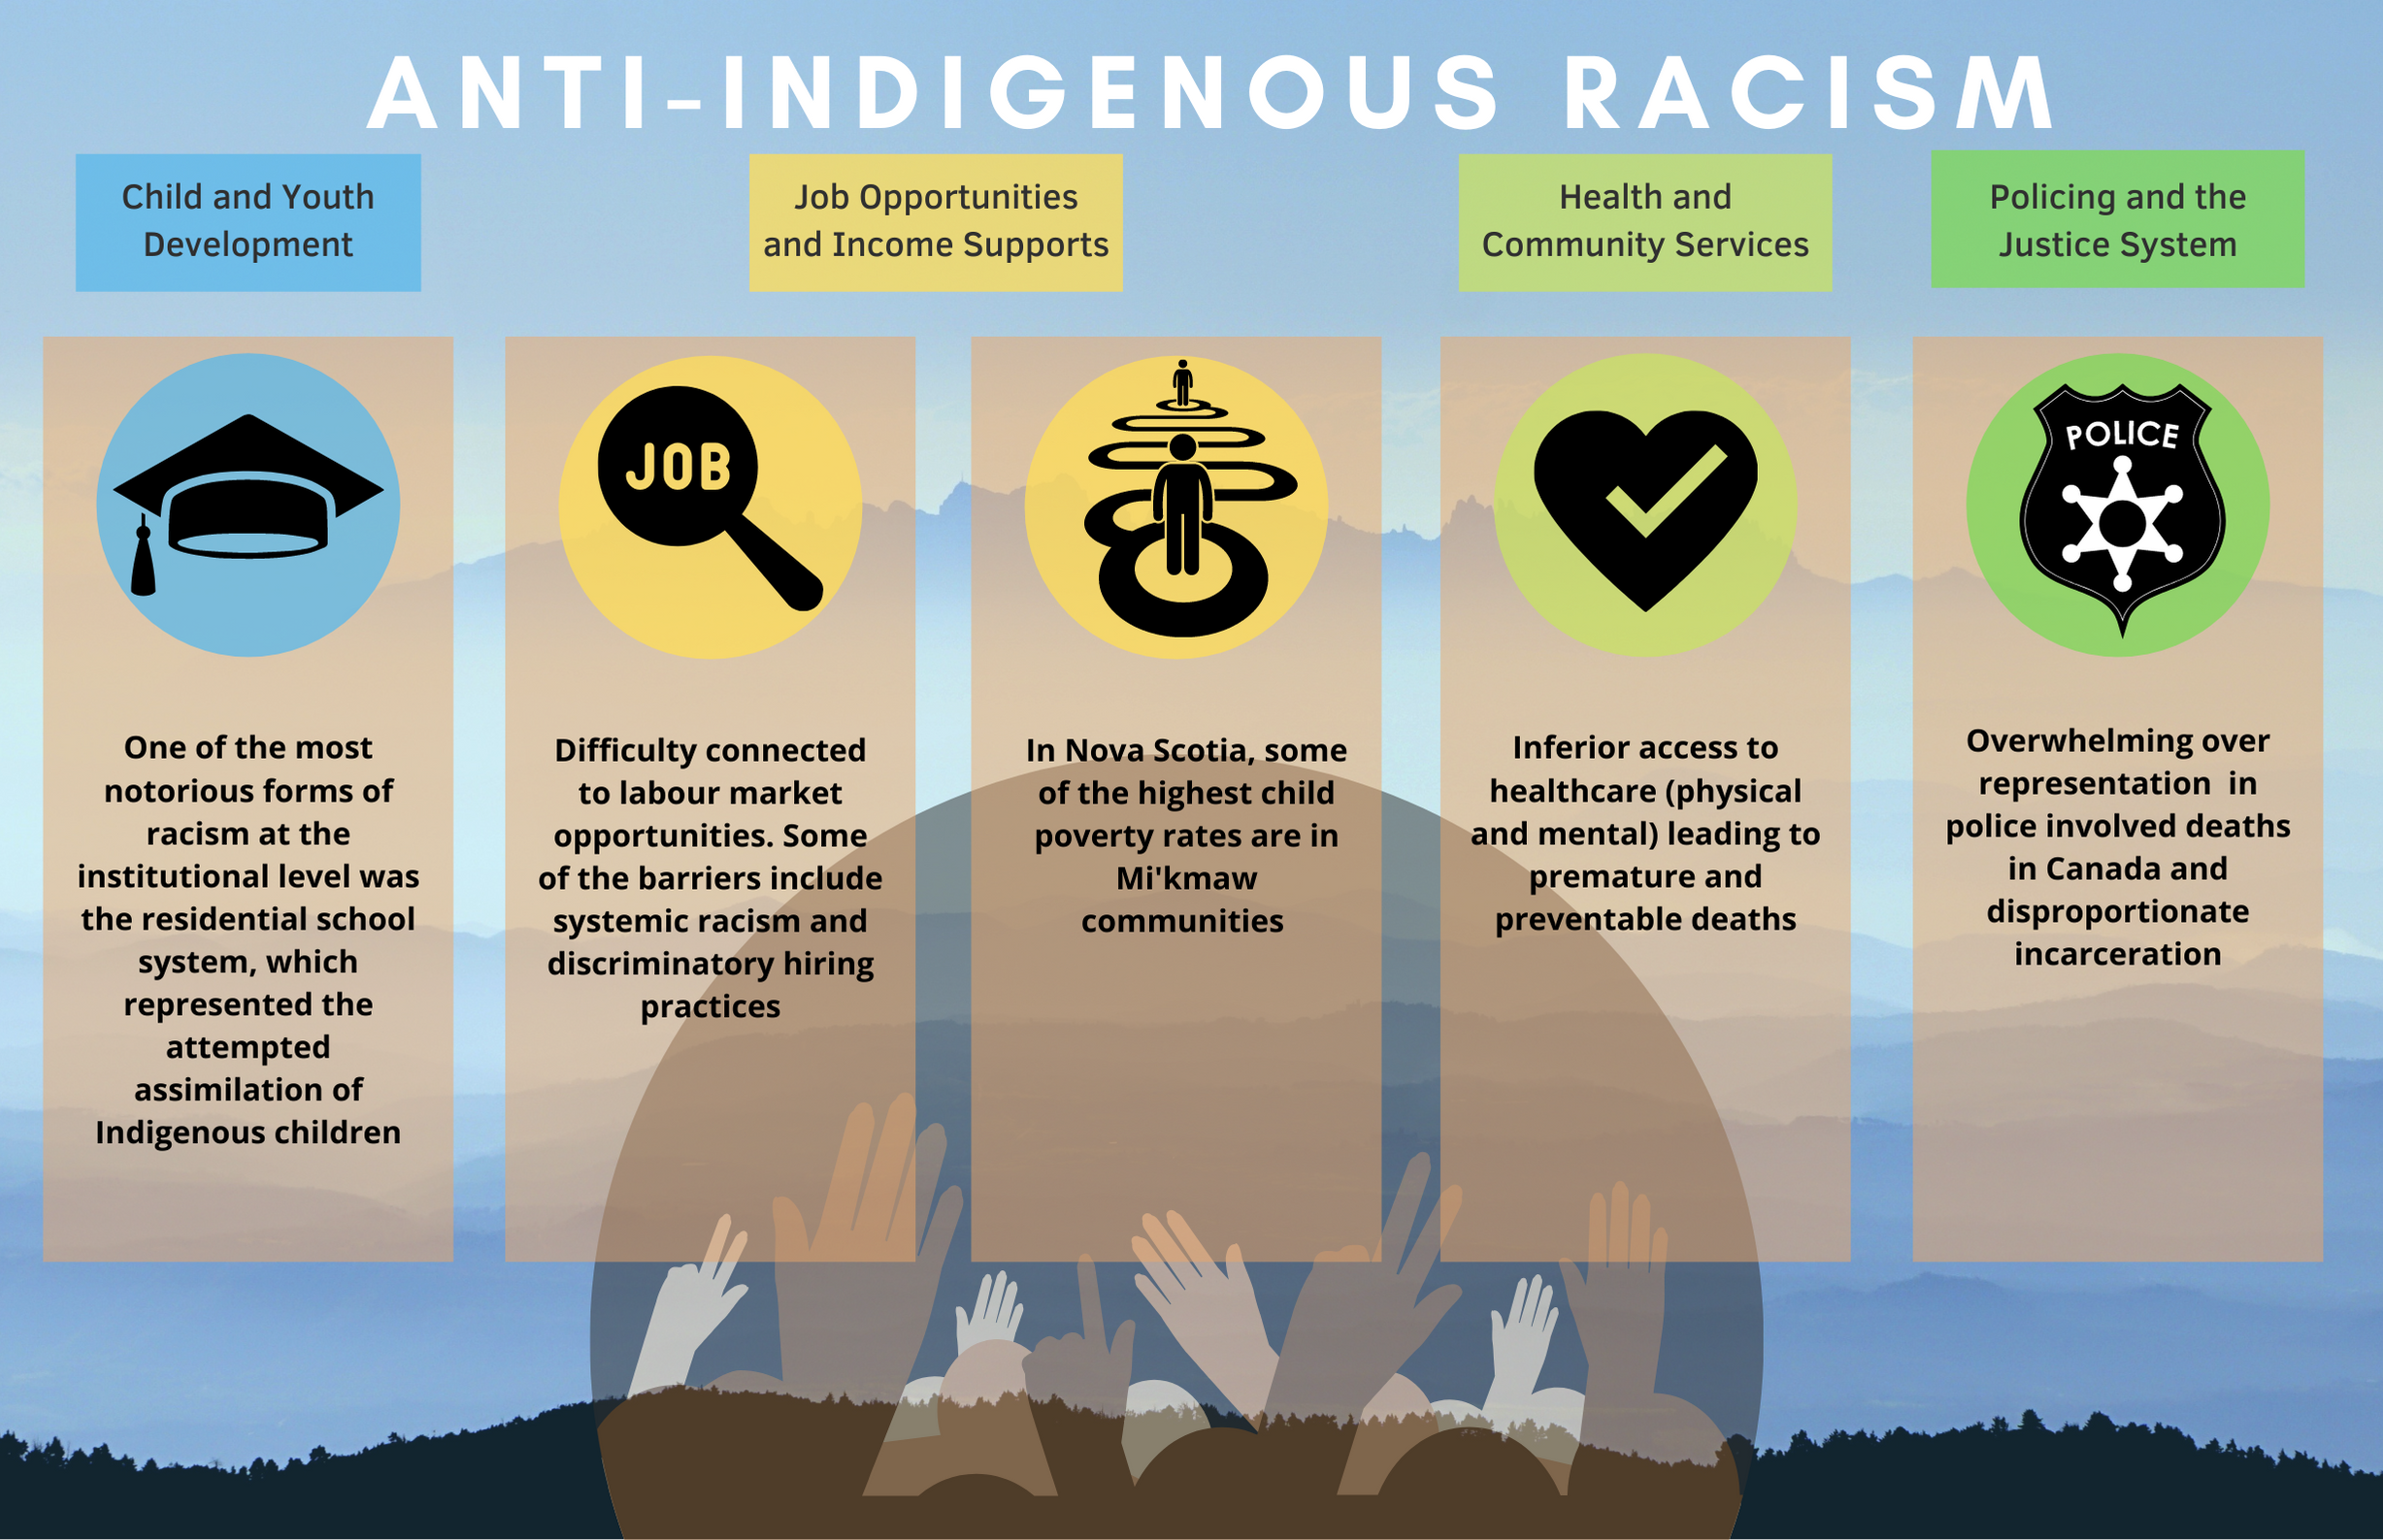 Title: Anti- Indigenous Racism The following text is on an image of hands and mountians. Child and Youth Development: One of the most notorious forms of racism at the institutional level was the residential school system, which represented the attempted assimilation of Indigenous children Job Opportunities and Income Supports: Difficulty connected to labour market opportunities. Some of the barriers include systemic racism and discriminatory hiring practices In Nova Scotia, some of the highest child poverty rates are in Mi'kmaw communities Health and Community Services: Inferior access to healthcare (physical and mental) leading to premature and preventable deaths Policing and the Justice System: Overwhelming over representation in police involved deaths in Canada and disproportionate incarceration